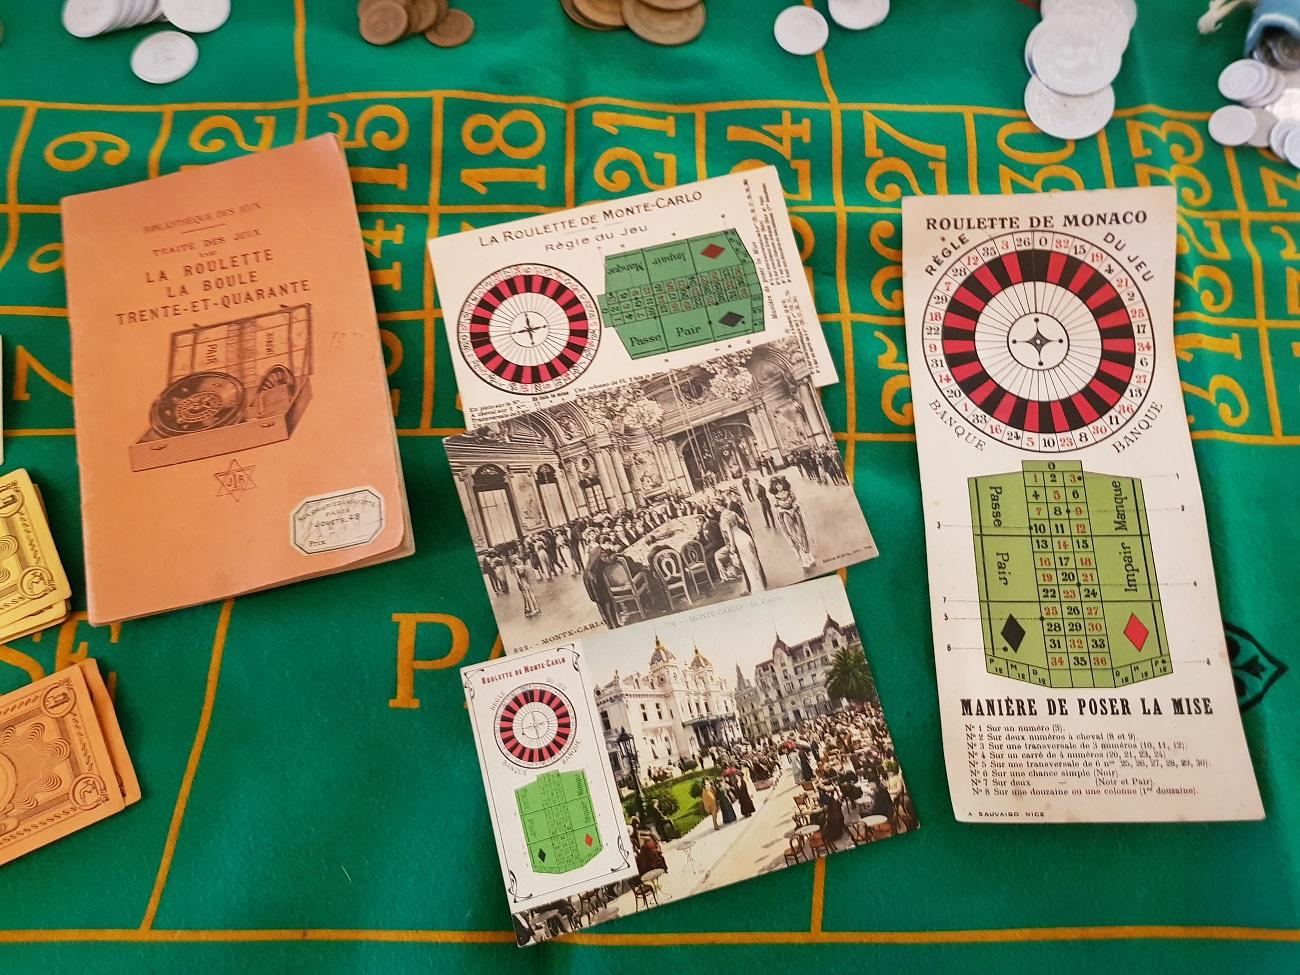 Vintage French Roulette game from the 1950s complete with currency, bills and use description in French, the cloth has wear at the bottom by use and age and a few moth holes.

The measurements of the roulette are:
Depth 35 cm/ 13.7 inch.
Width